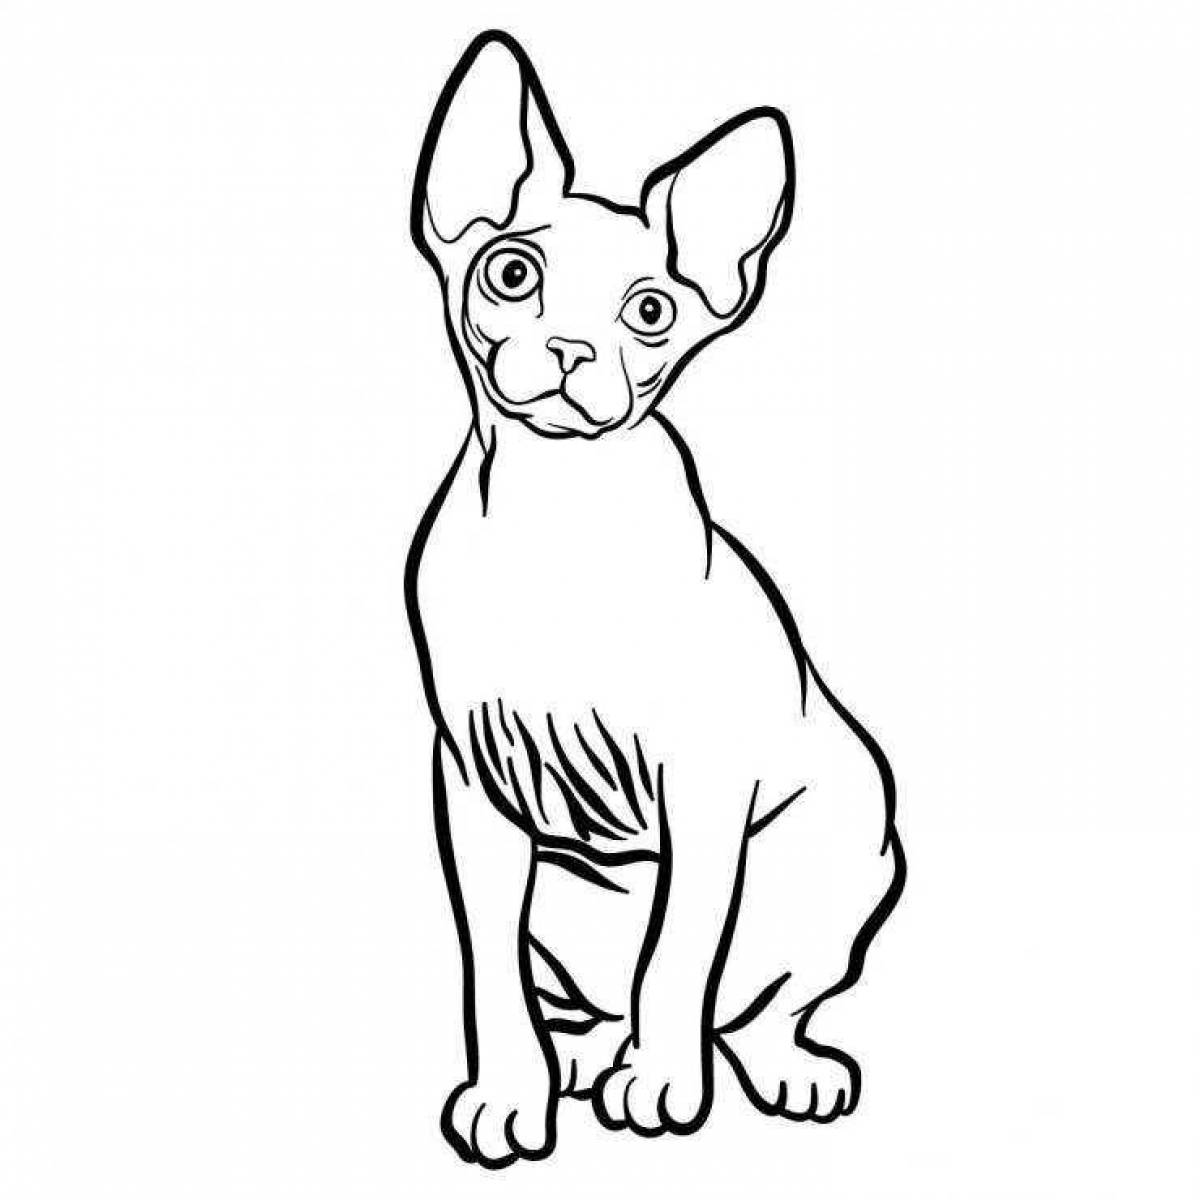 Coloring page graceful sphinx cat